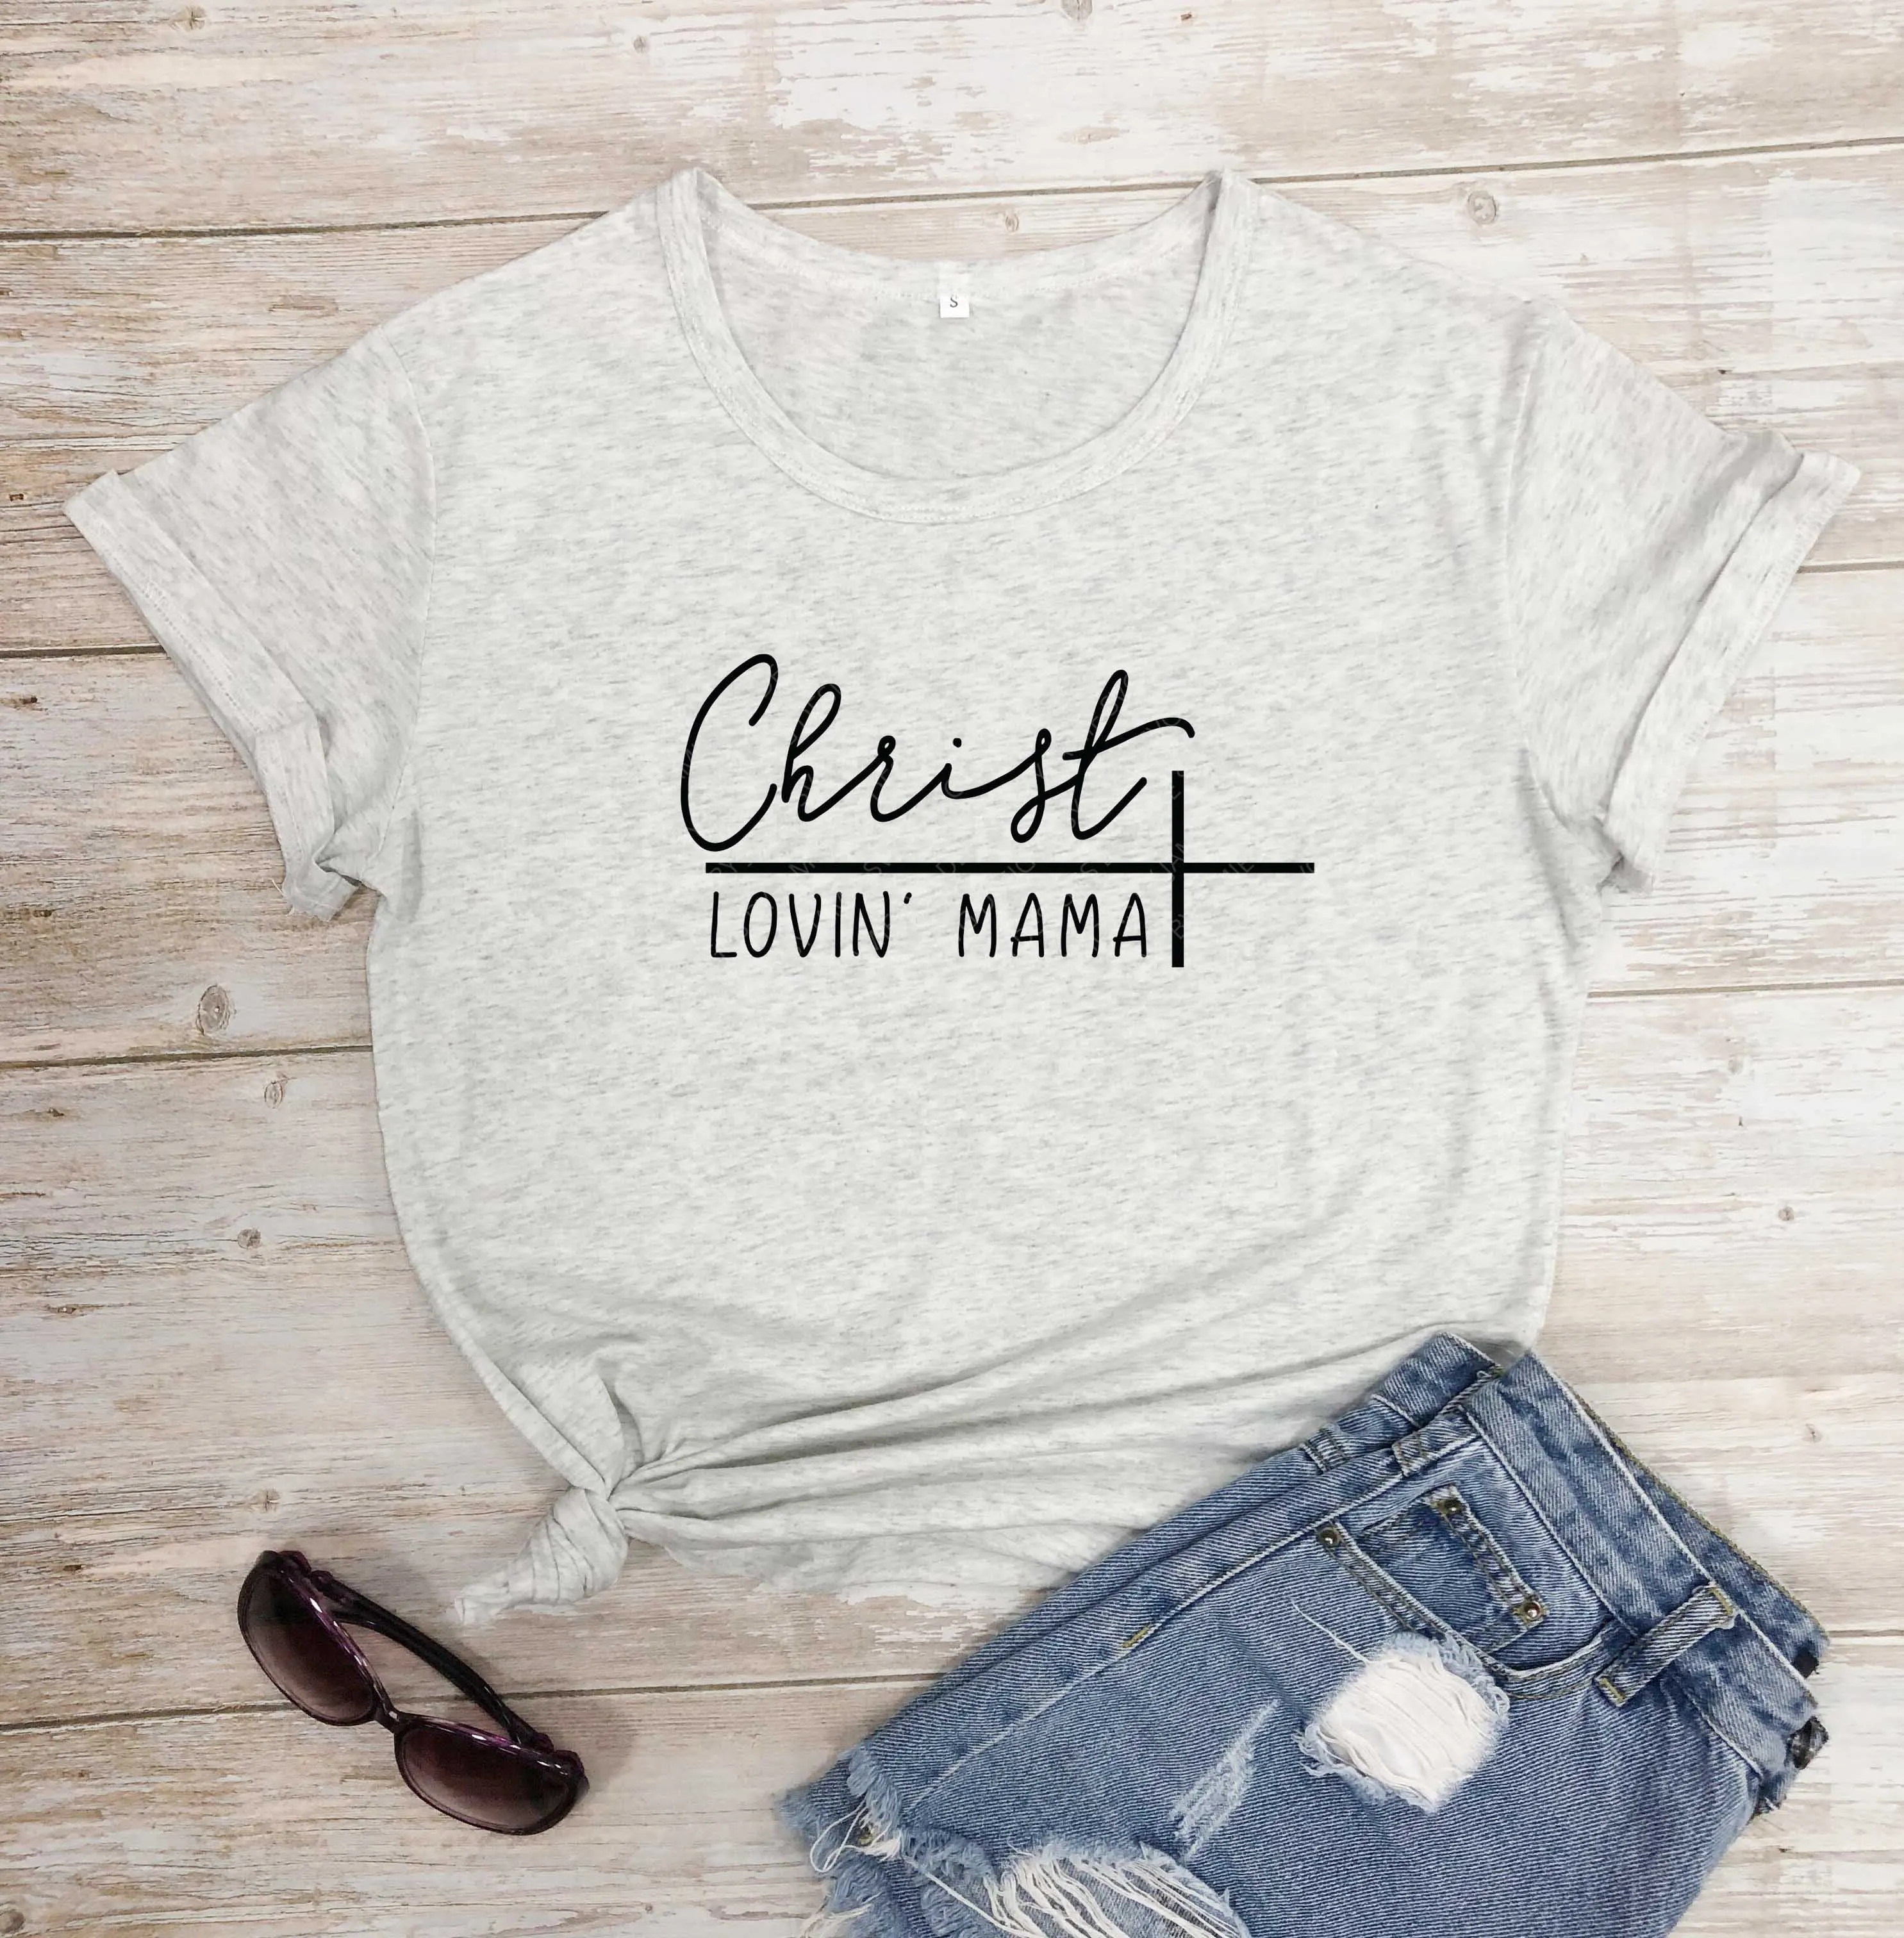 

Christian Faith Mama Religious Cross religion women fashion pure cotton casual young hipster t shirt slogan grunge tumblr tees